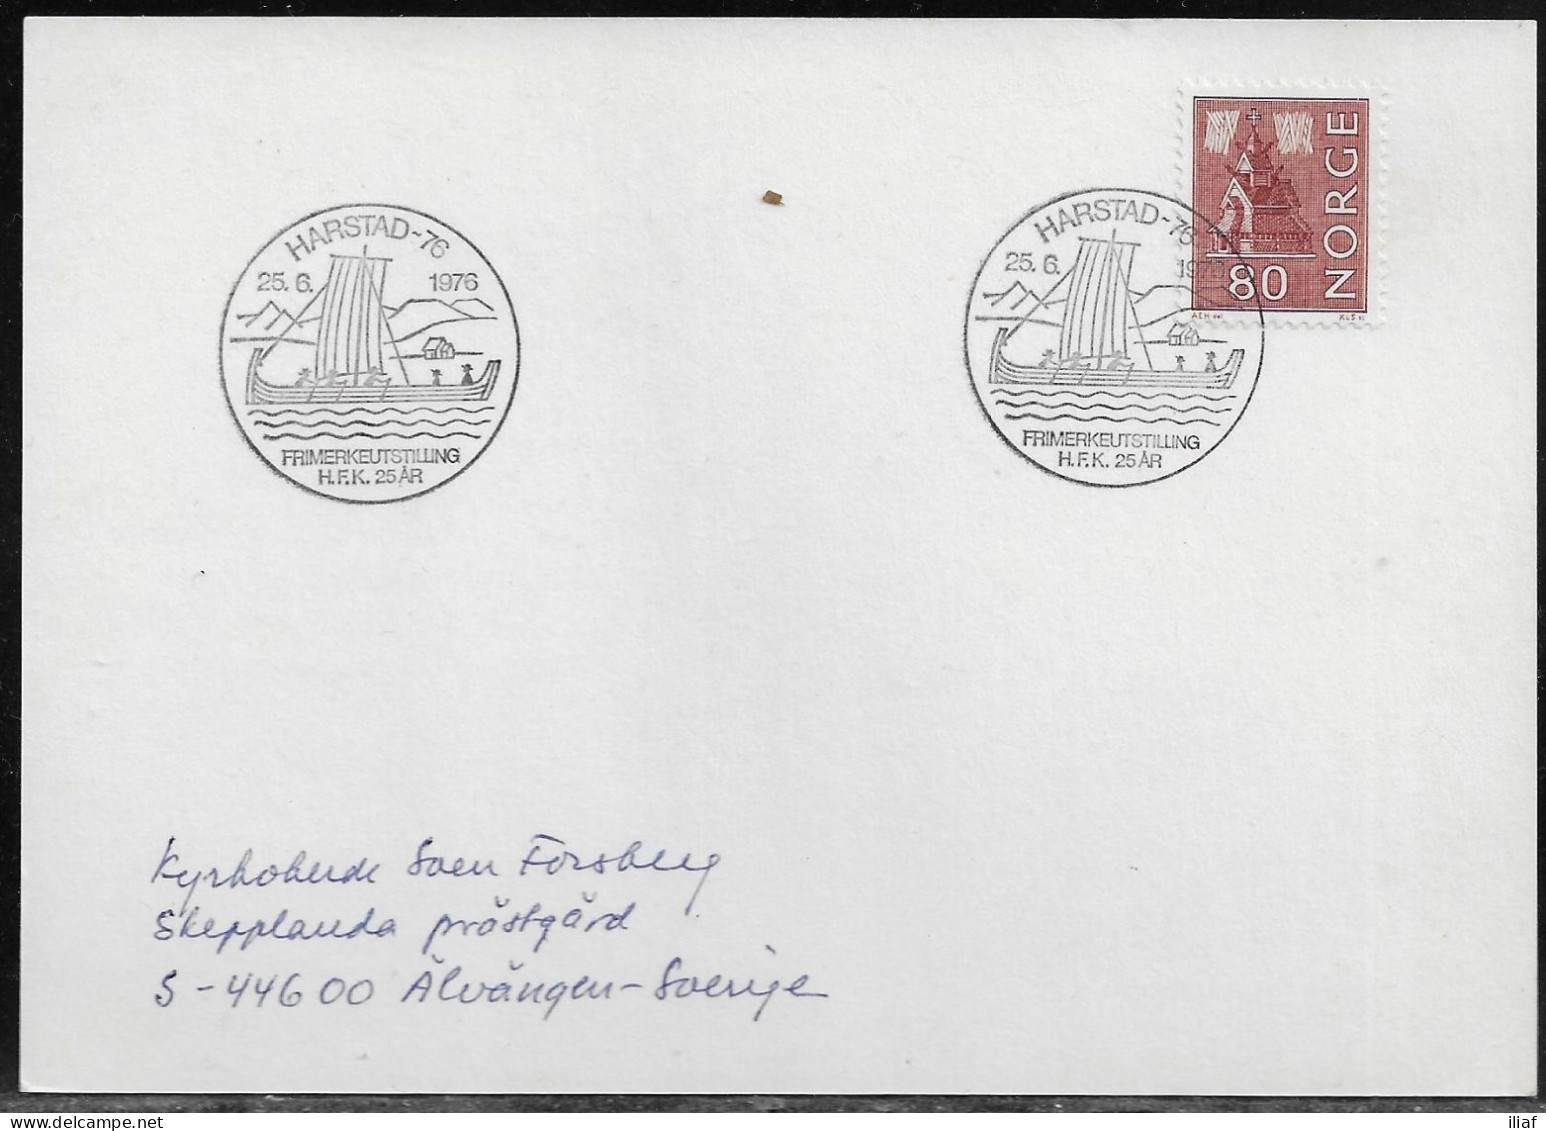 Norway.   HARSTAD-76, STAMP EXHIBITION, H.F.K. 25 YEARS.   Norway Special Event Postmark. - Lettres & Documents